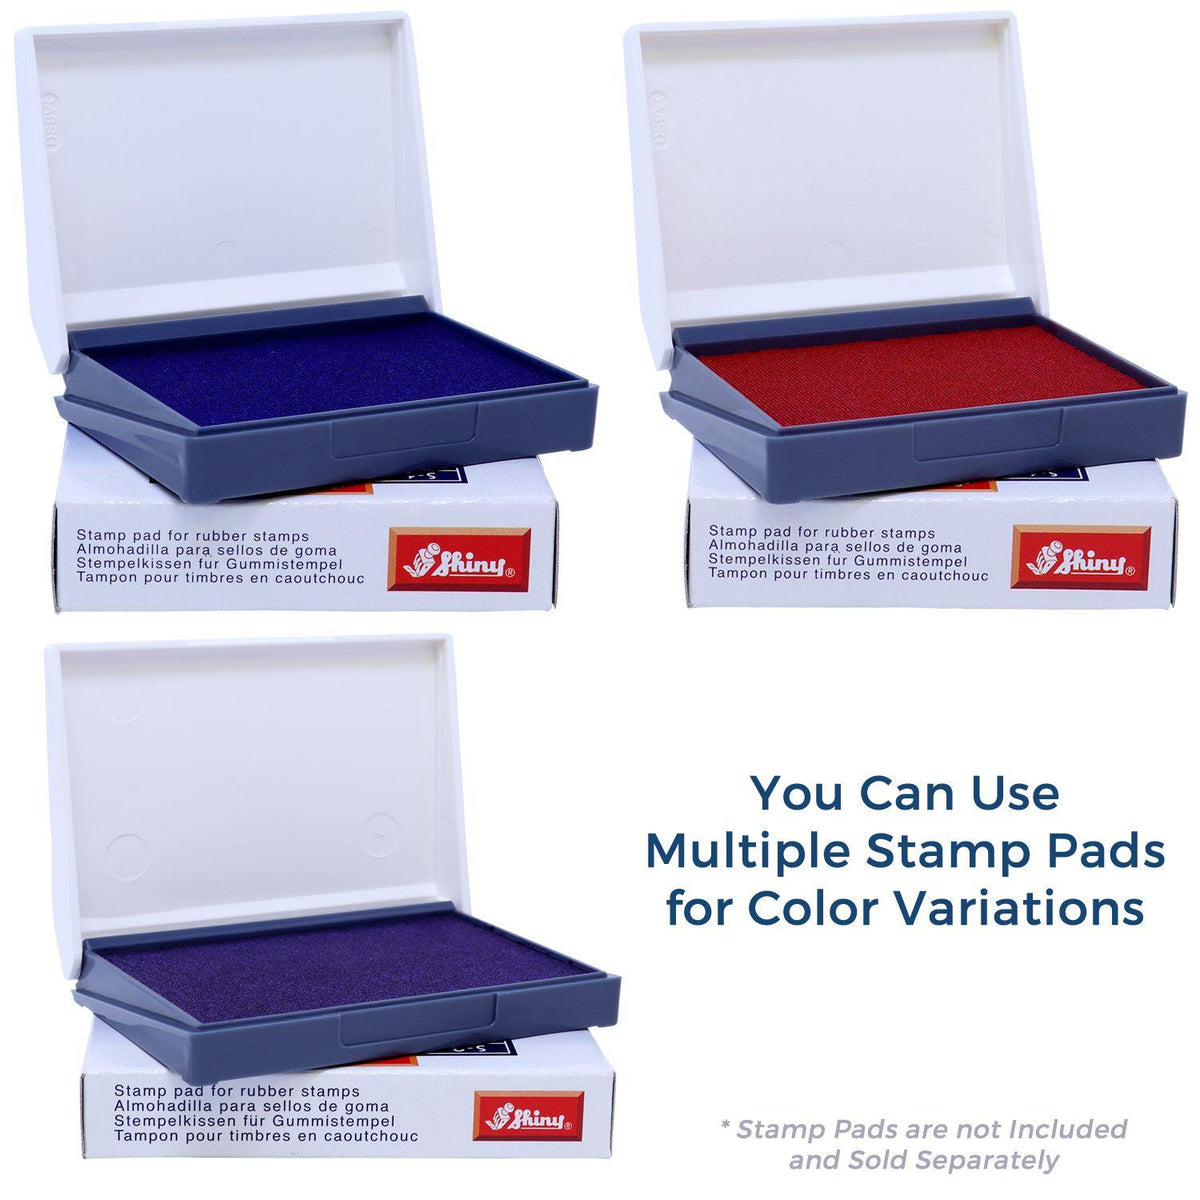 Stamp Pads for Large Priority Rubber Stamp Available